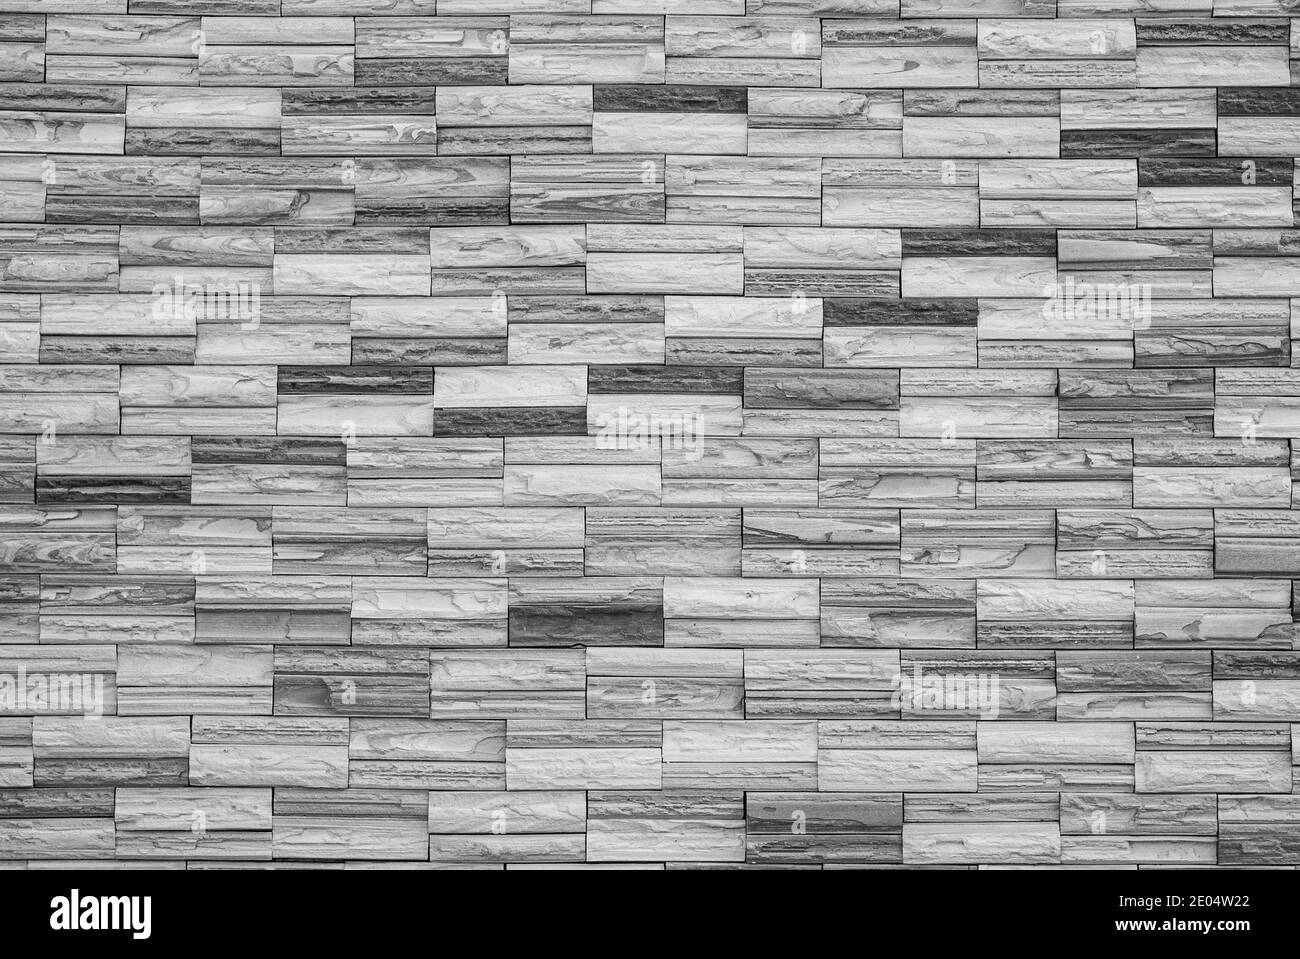 Natural craft stone tile wall made to random pattern background, black and white. Stock Photo